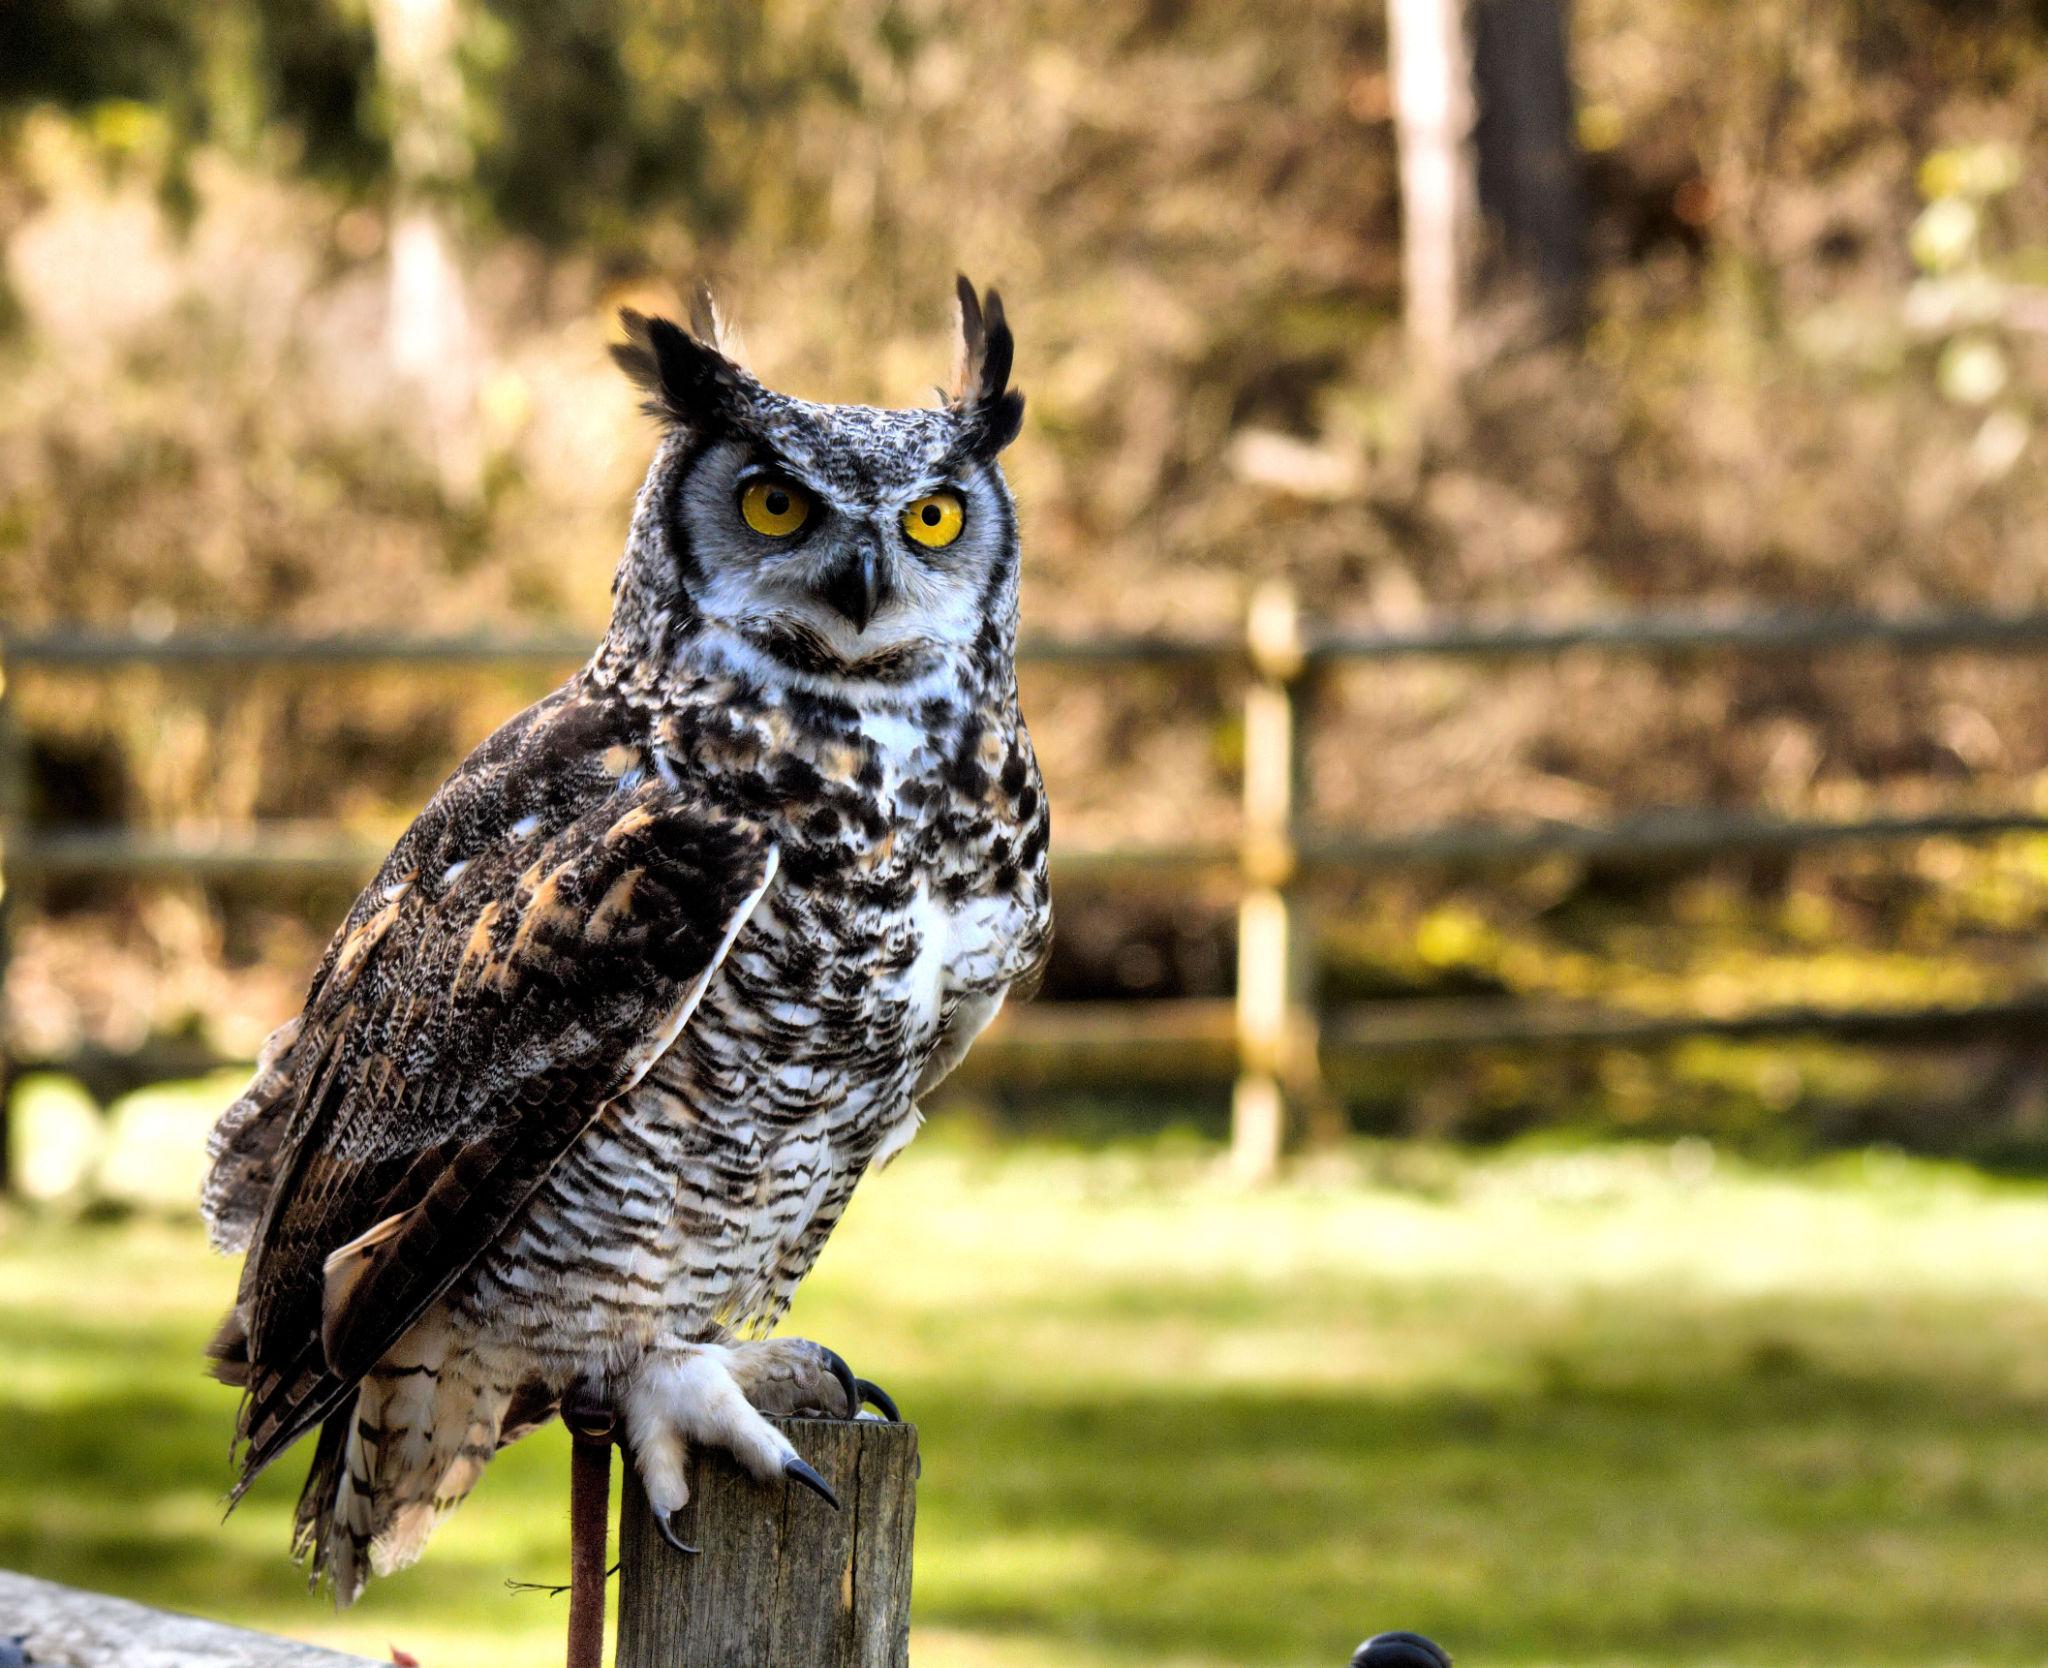 A Great-horned Owl sitting on a post